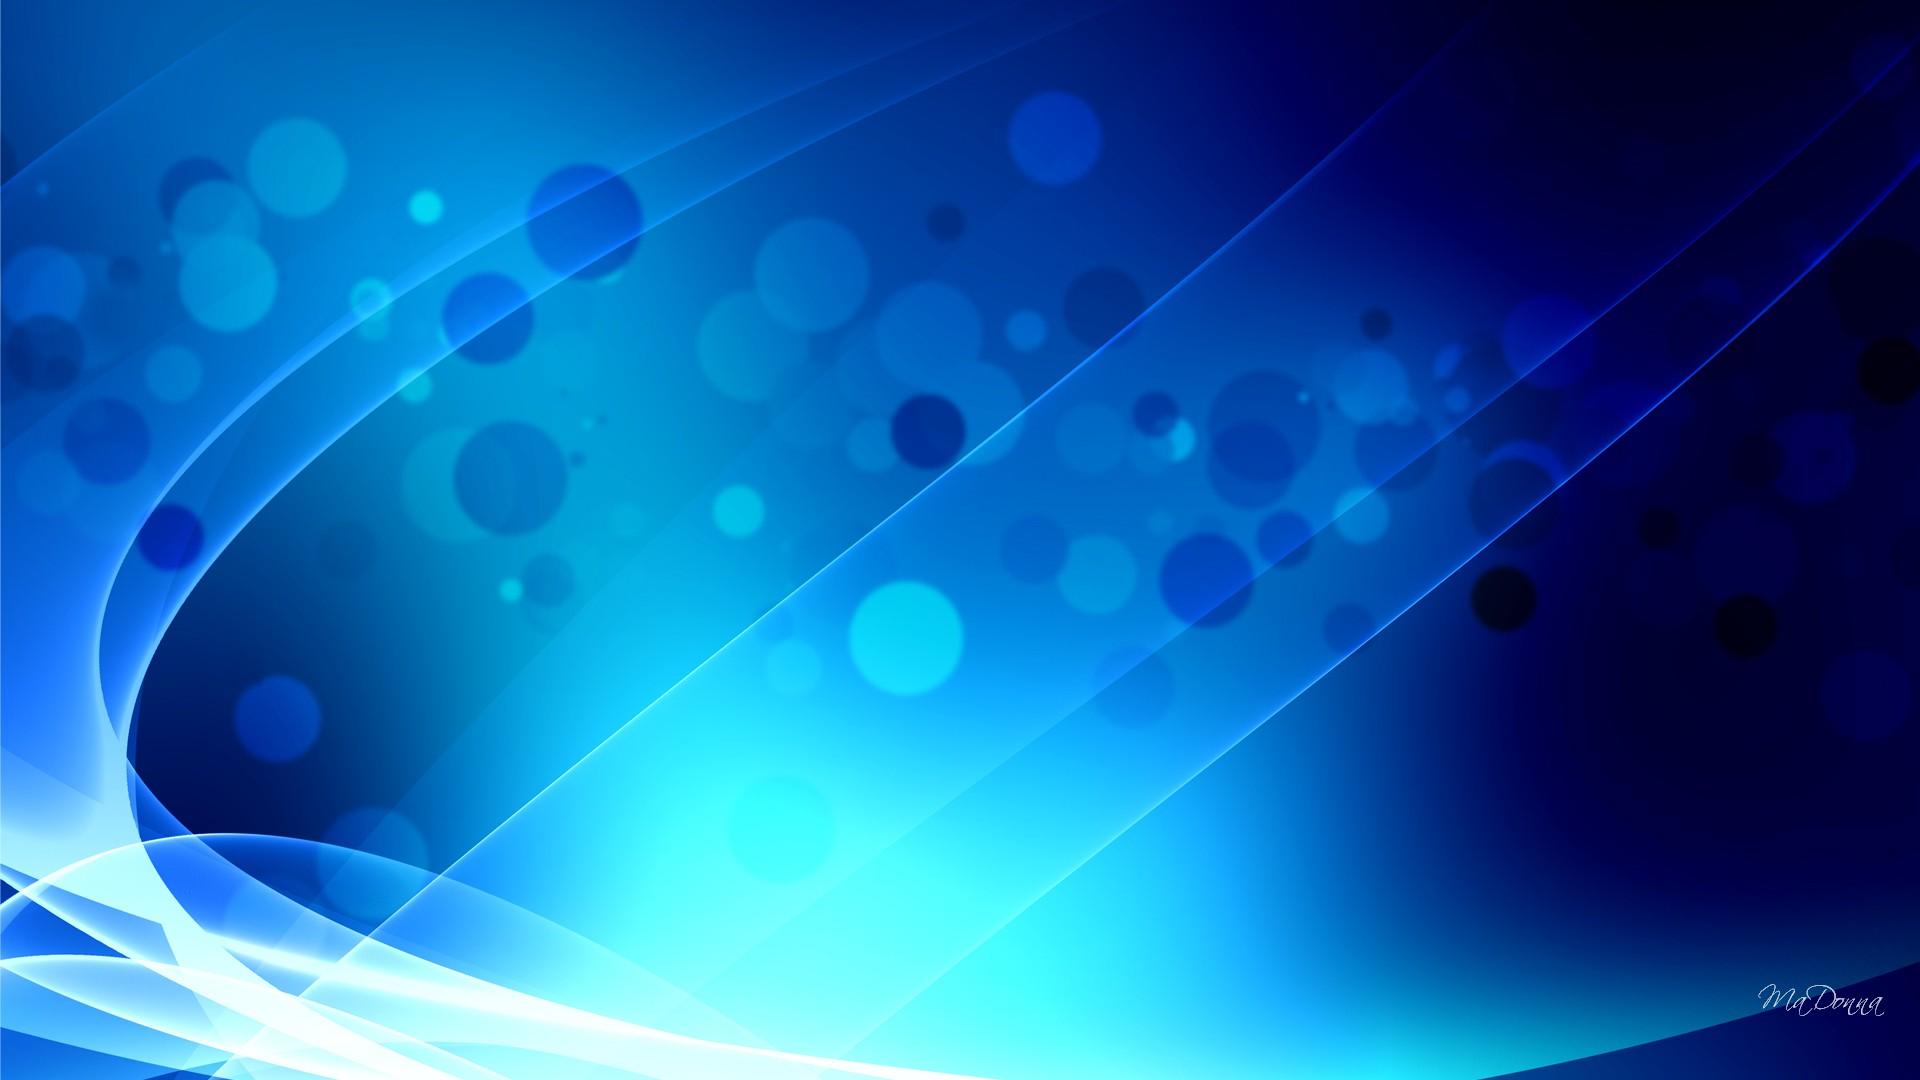 Wallpaper blue abstract